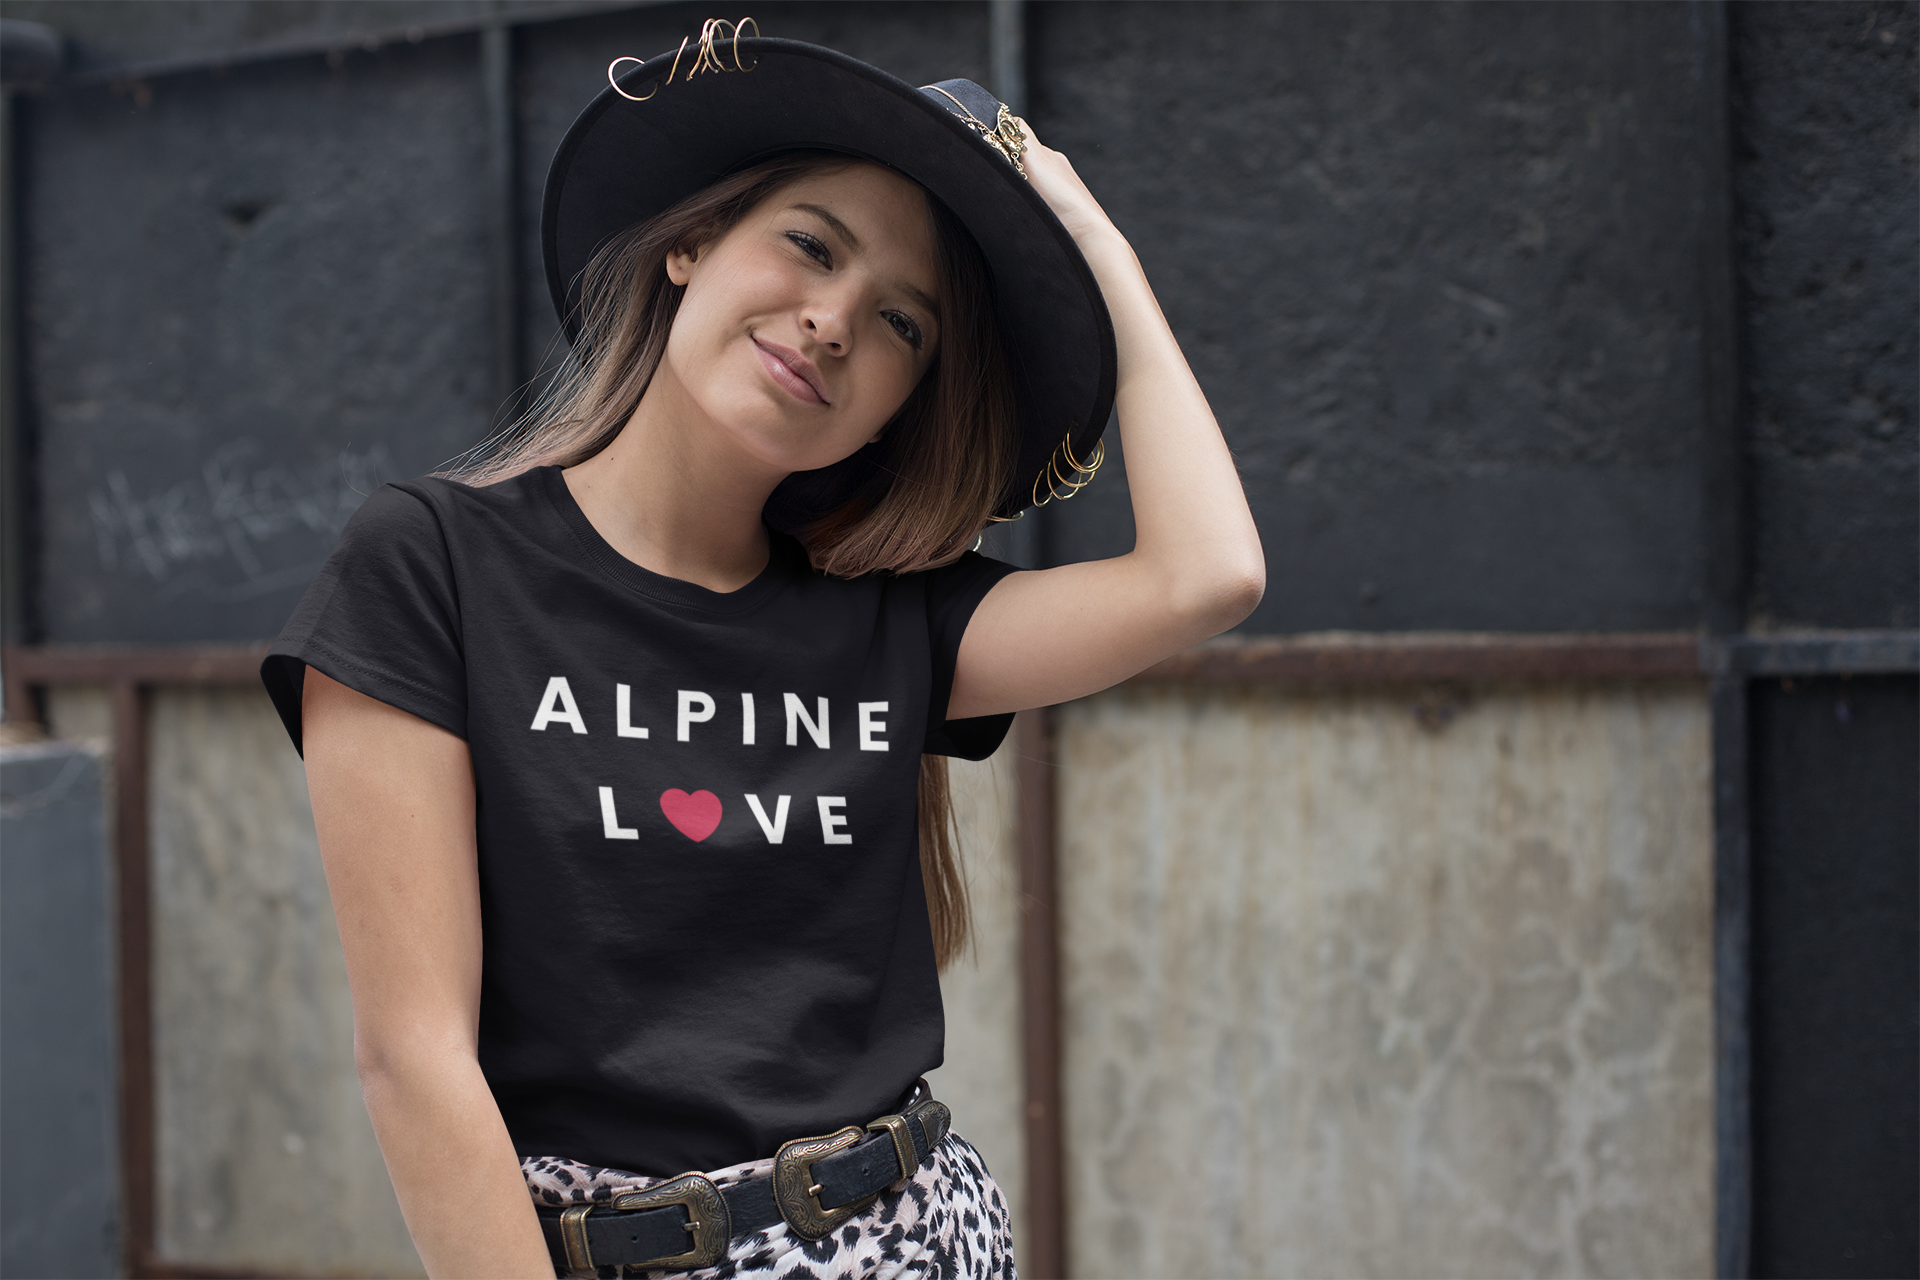 Stylish woman posing with her hand on her hat wearing an Alpine t-shirt.